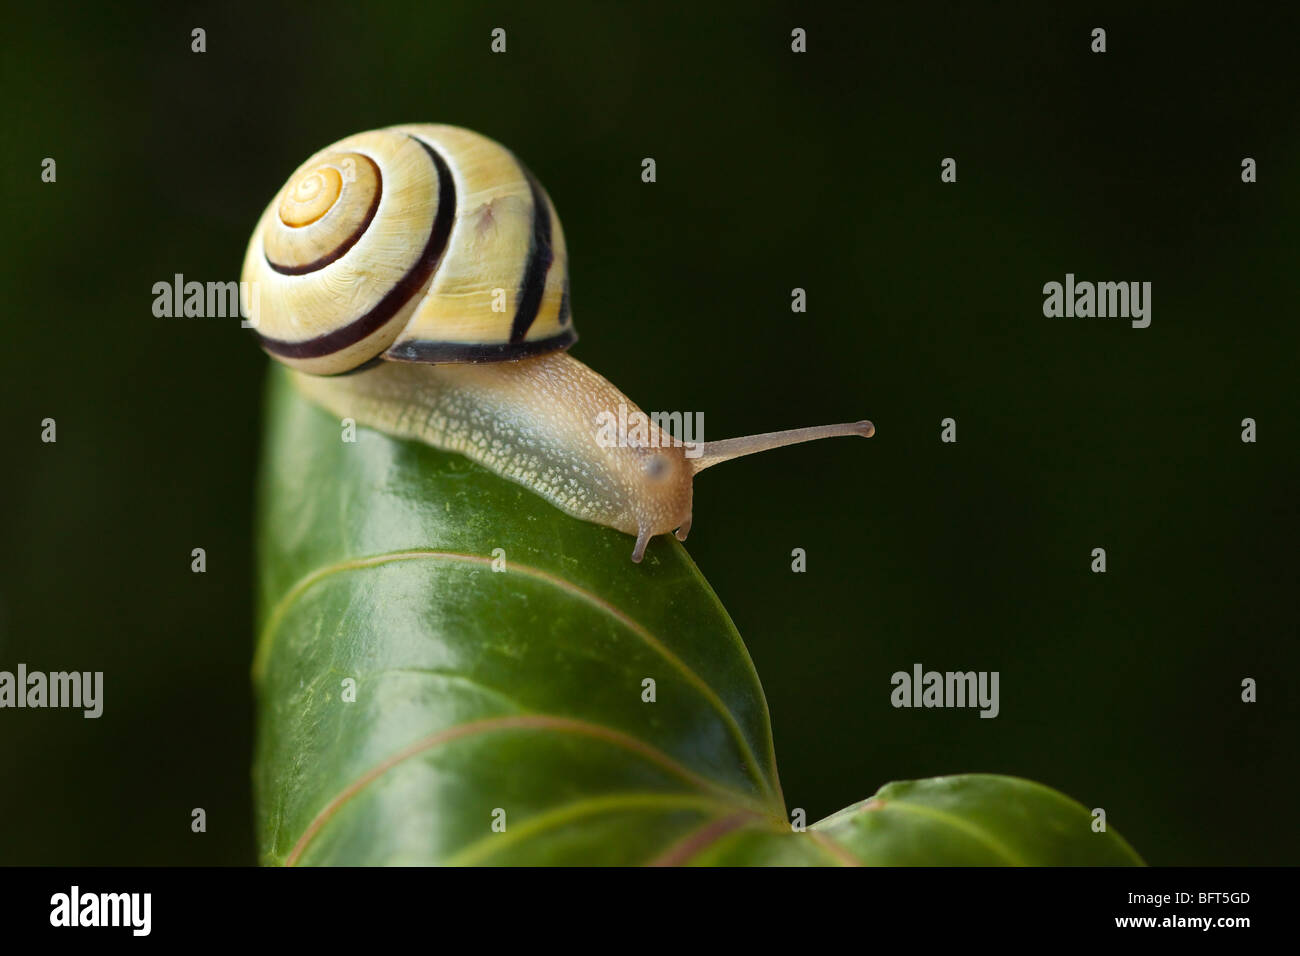 Brown-lipped Snail Stock Photo